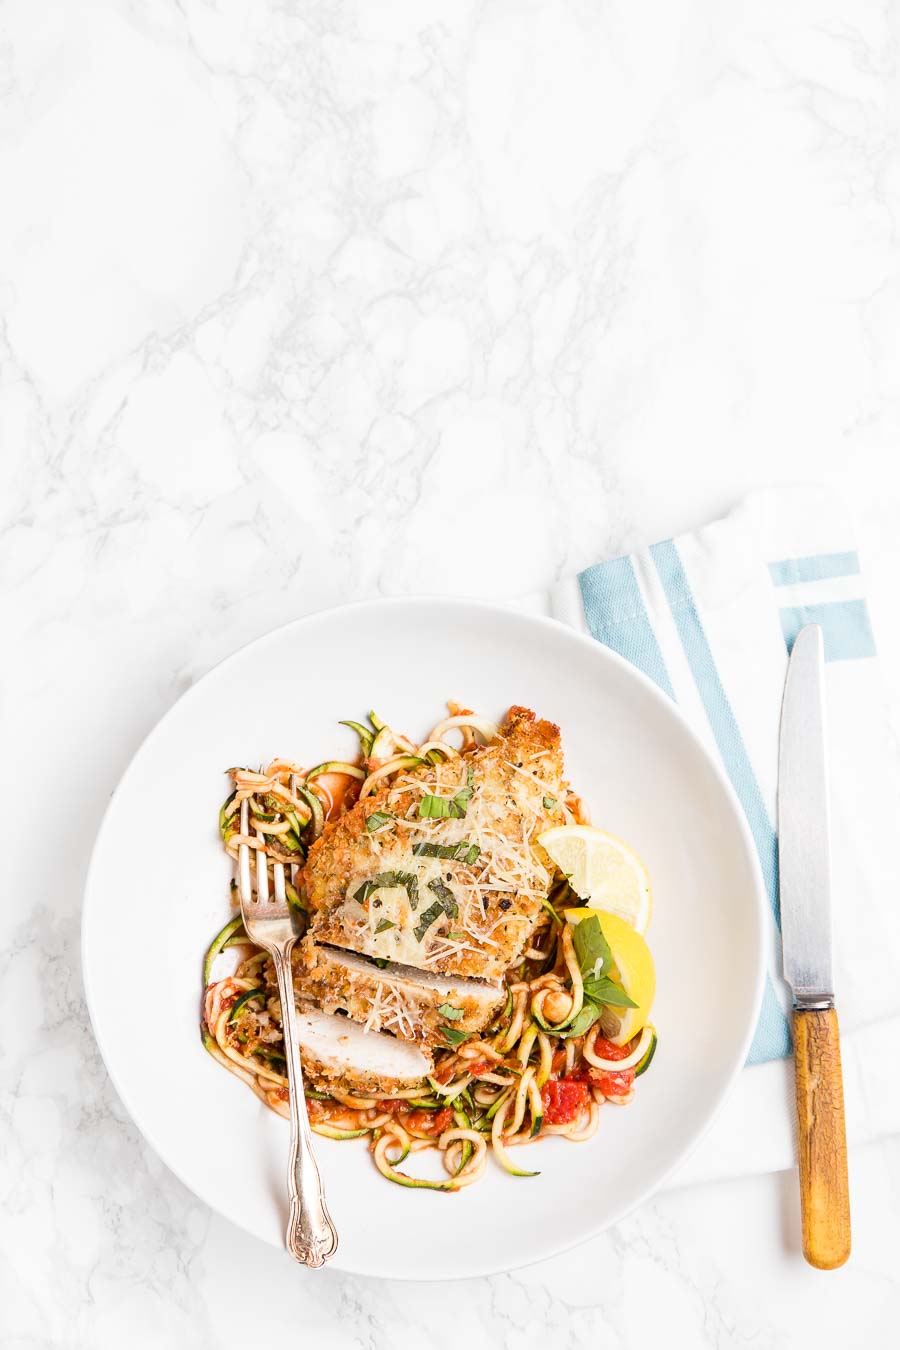 Baked chicken breast on a bed of zucchini noodles or zoodles with herbs and parmesan cheese on a white plate and a blue striped cloth with rustic knife and fork